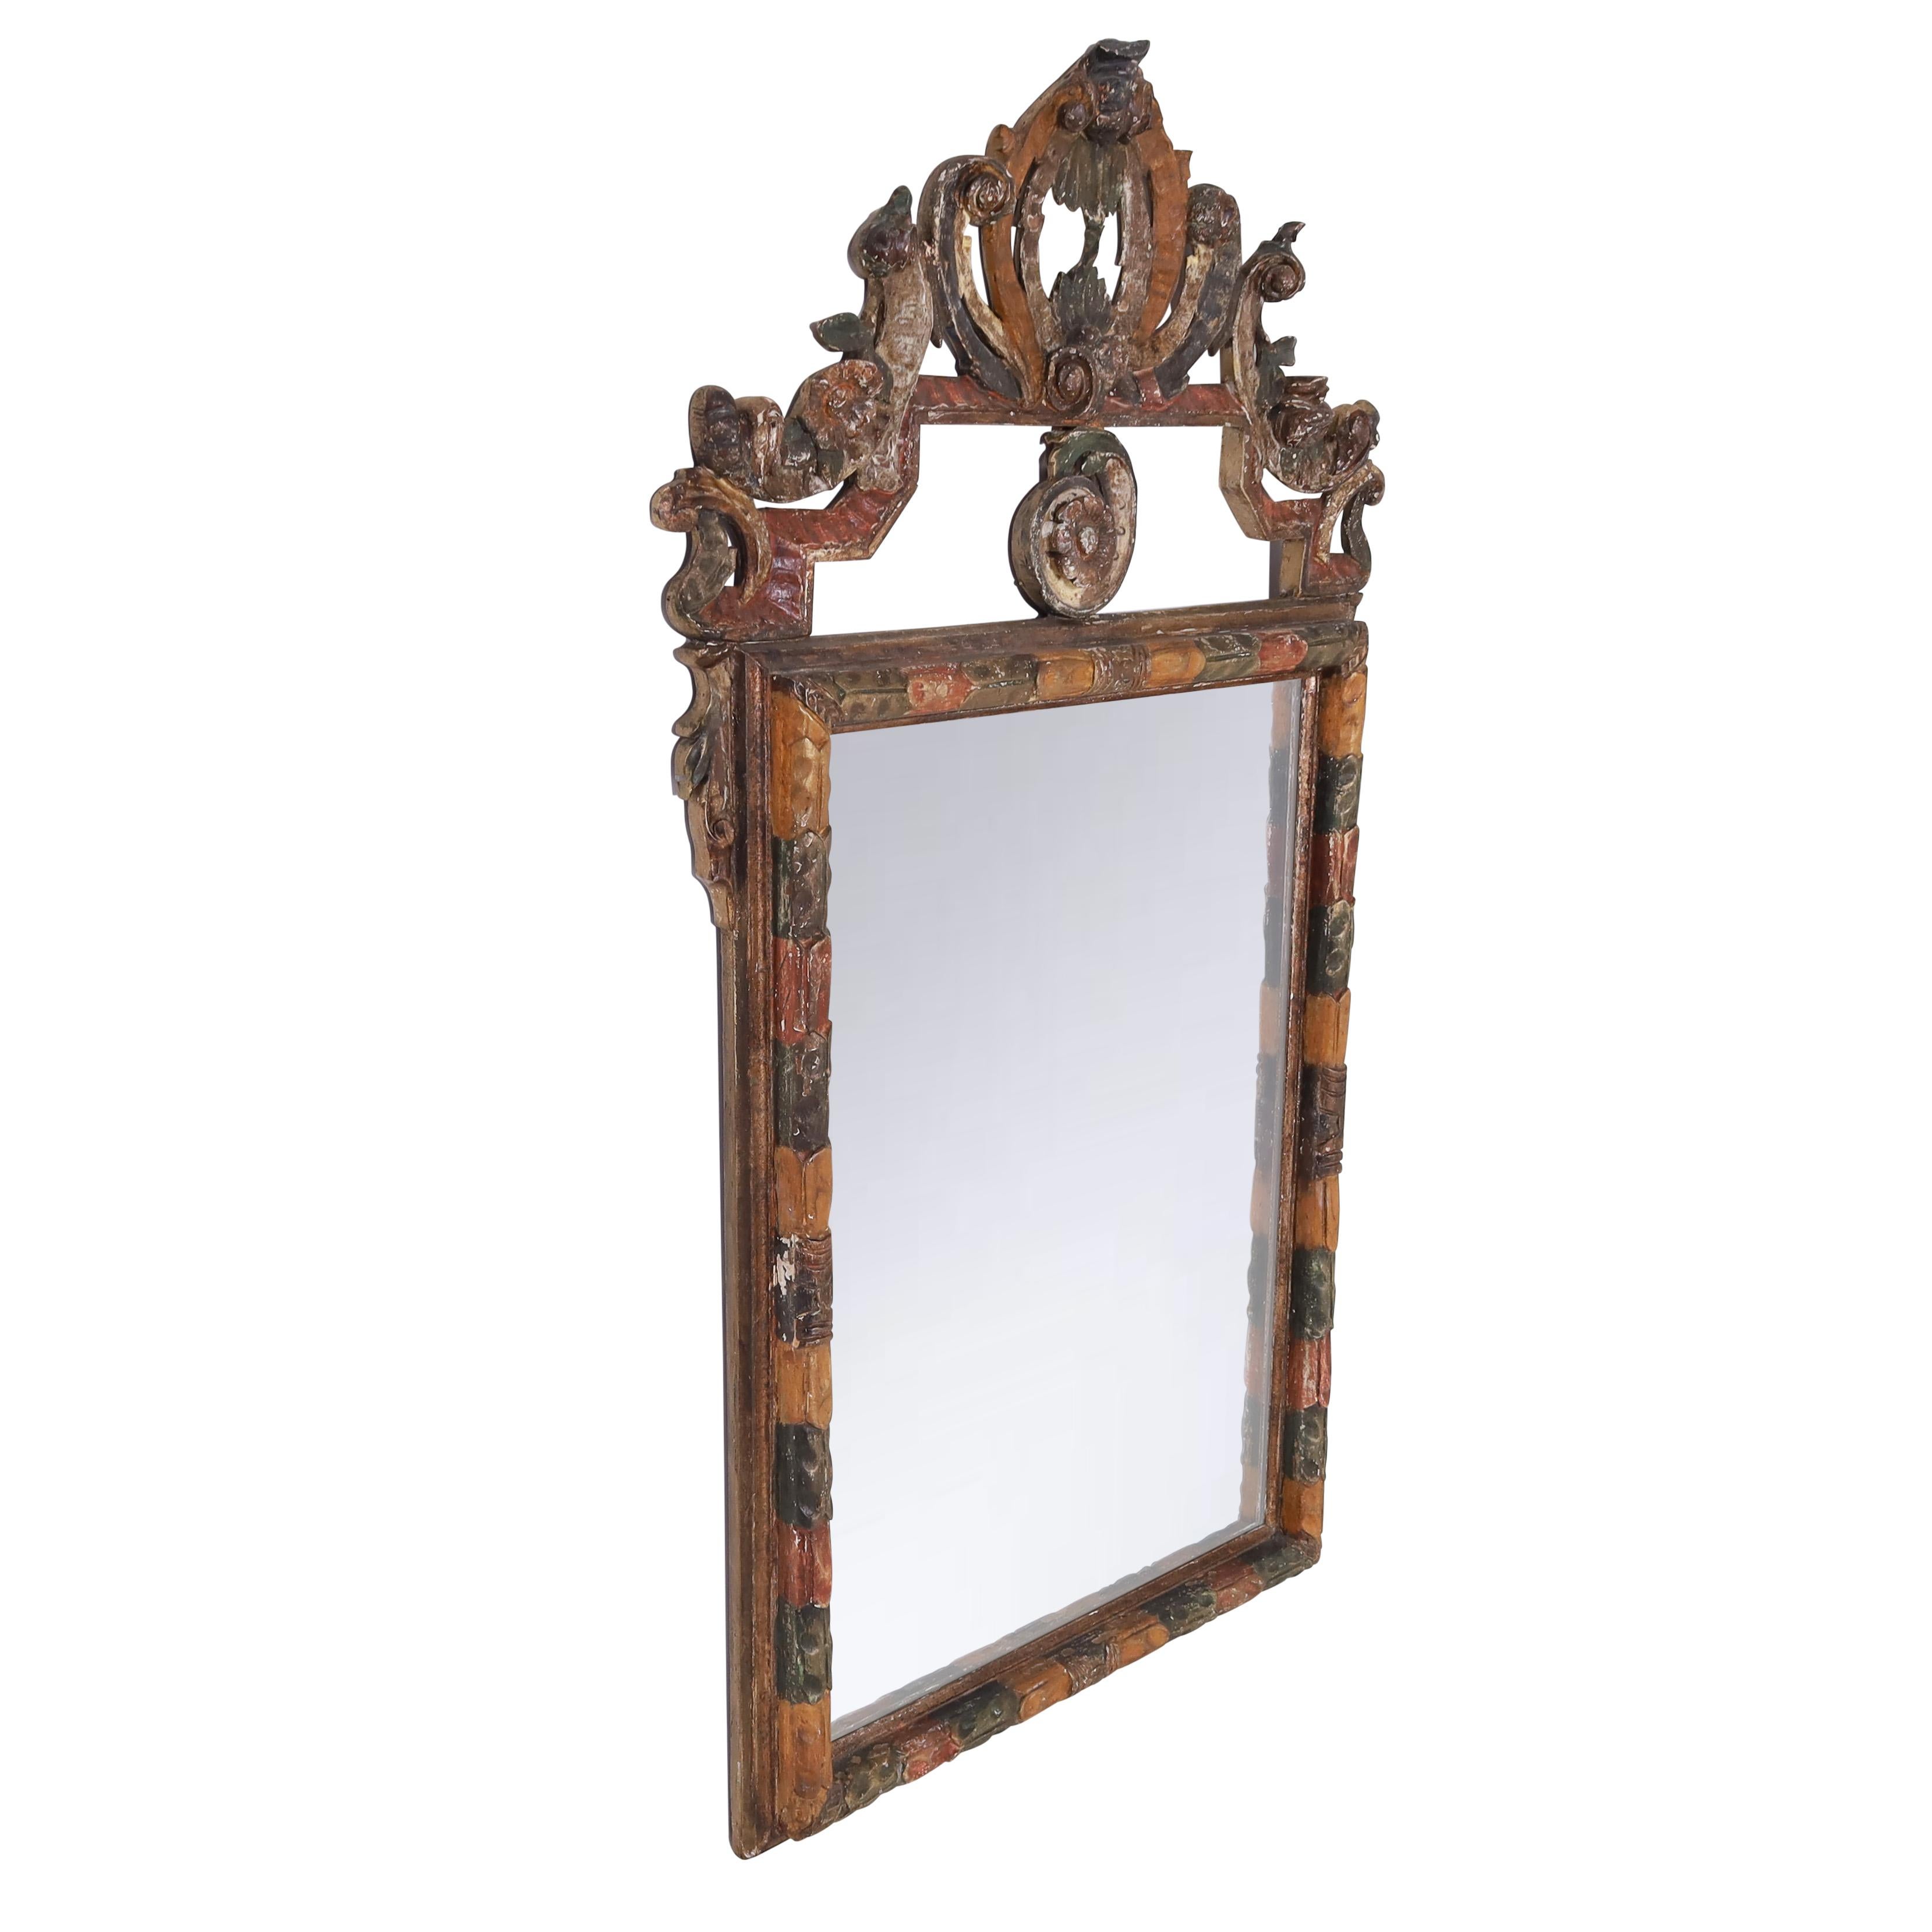 Impressive 18th century Italian Rococo wall mirror hand crafted in walnut, carved in classic floral motifs,gessoed and decorated with distinctive mediterranean colors now aged to perfection.